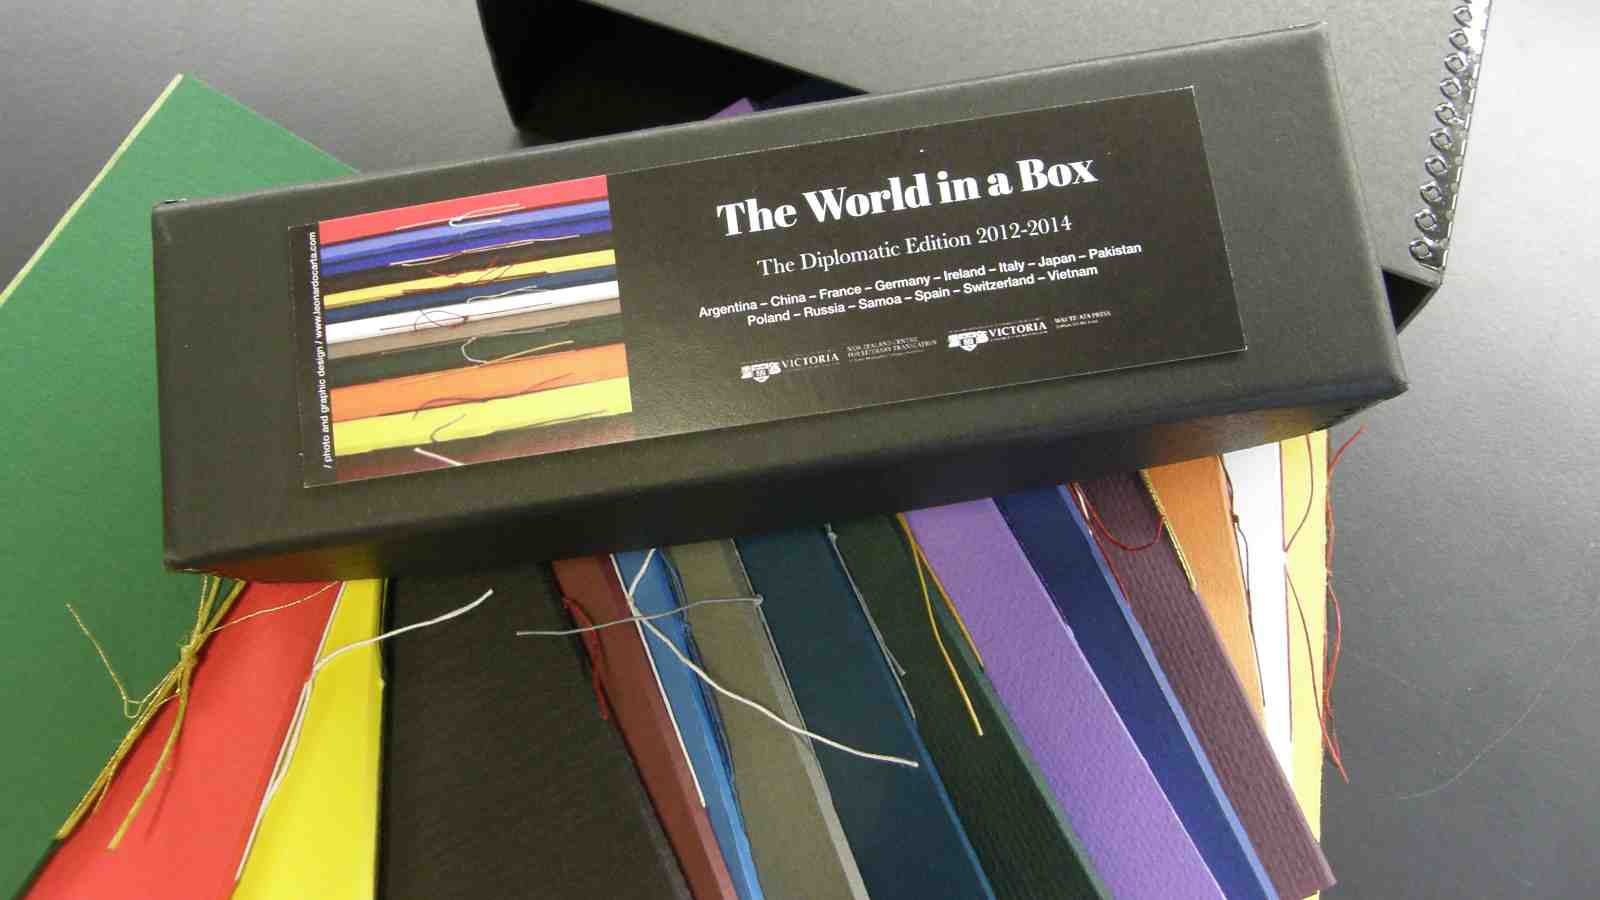 The World in a Box collection with it's colourful contents fanned out beneath the bow.